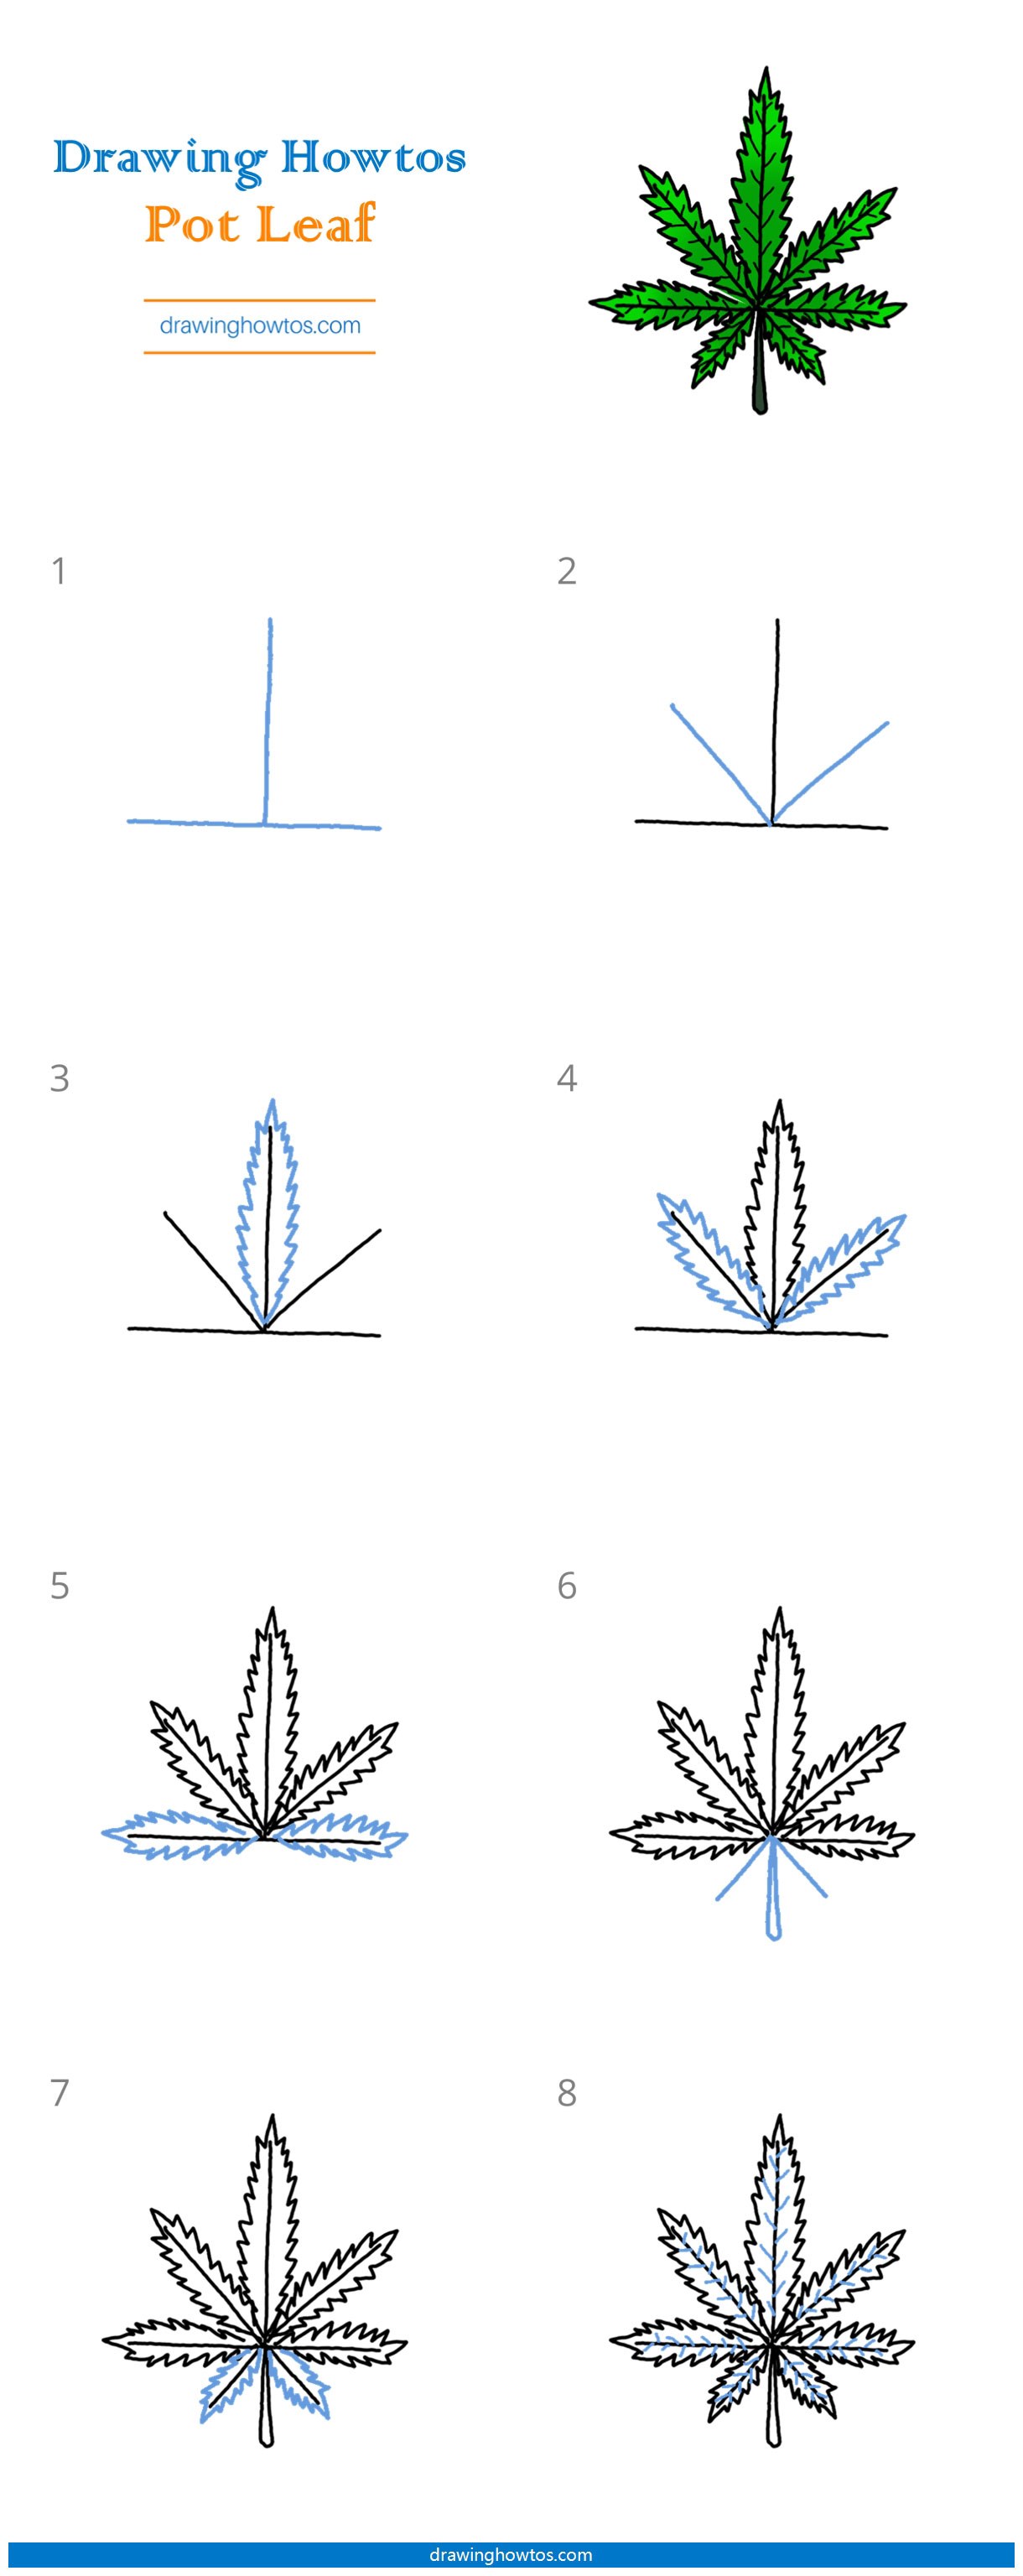 How to Draw a Pot Leaf - Step by Step Easy Drawing Guides - Drawing Howtos